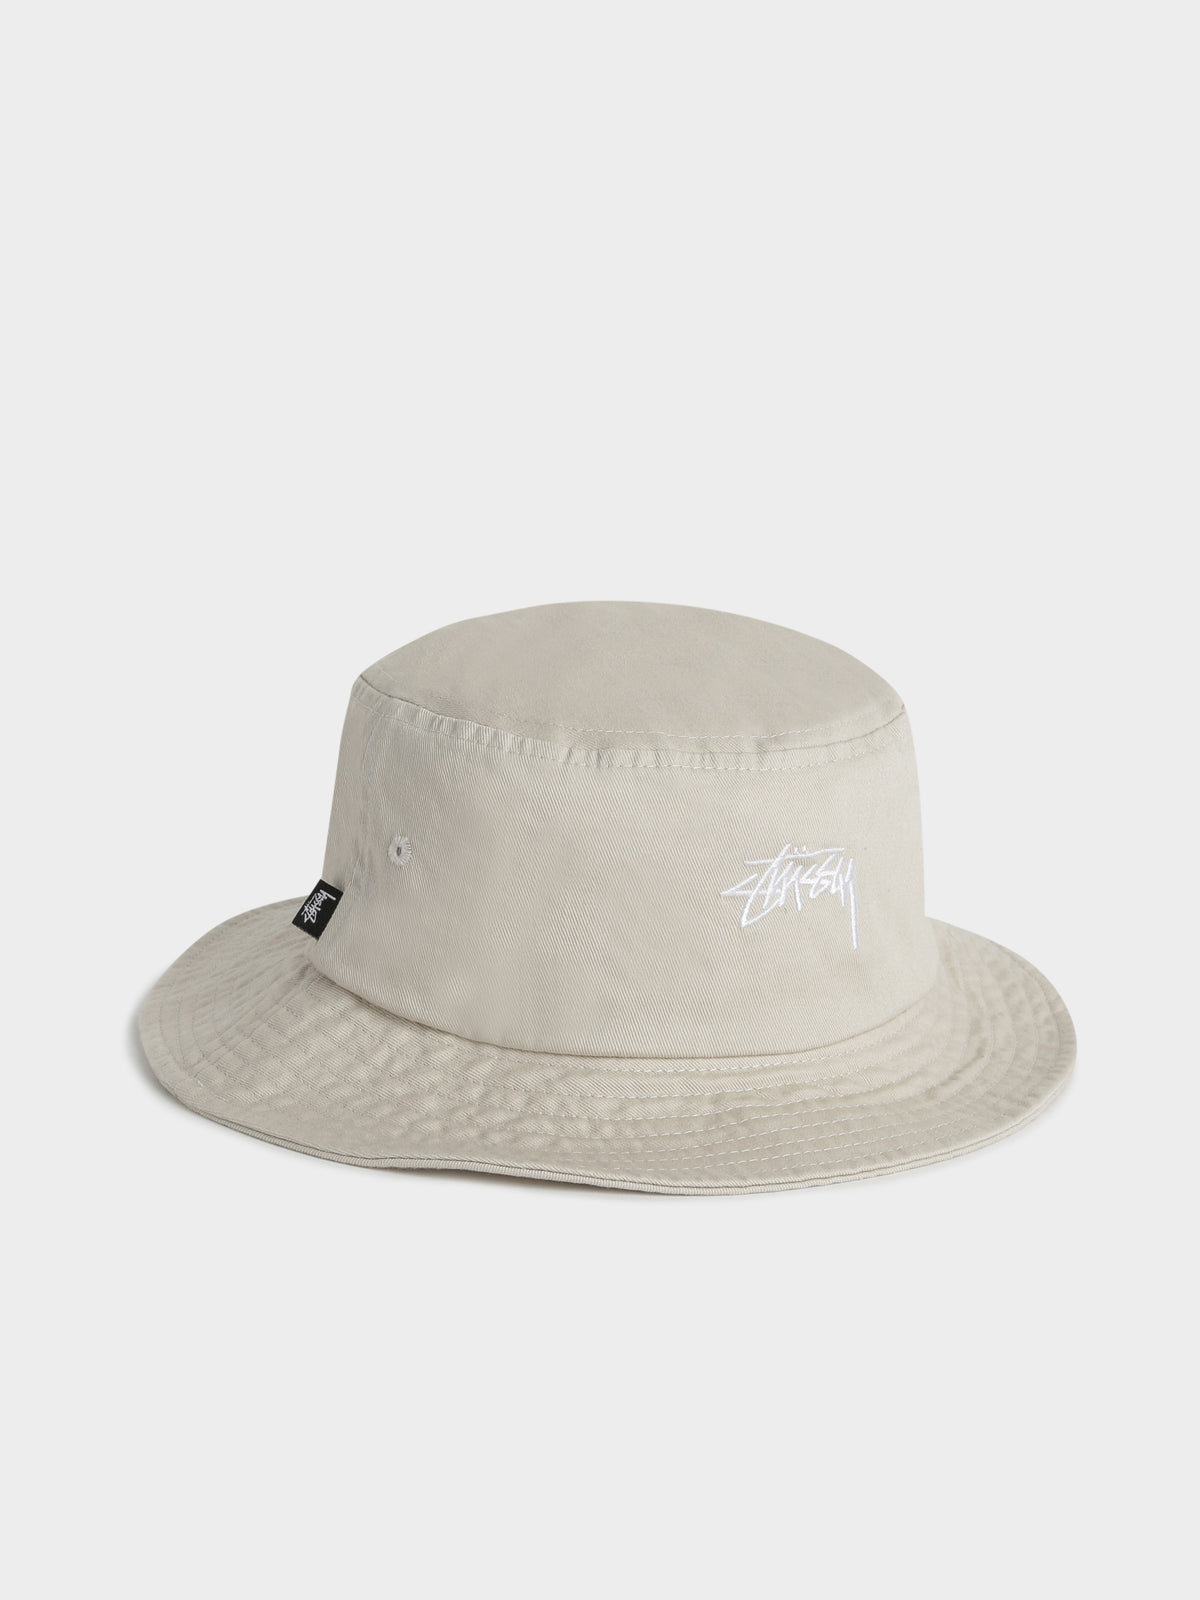 Stock Bucket Hat in Off White